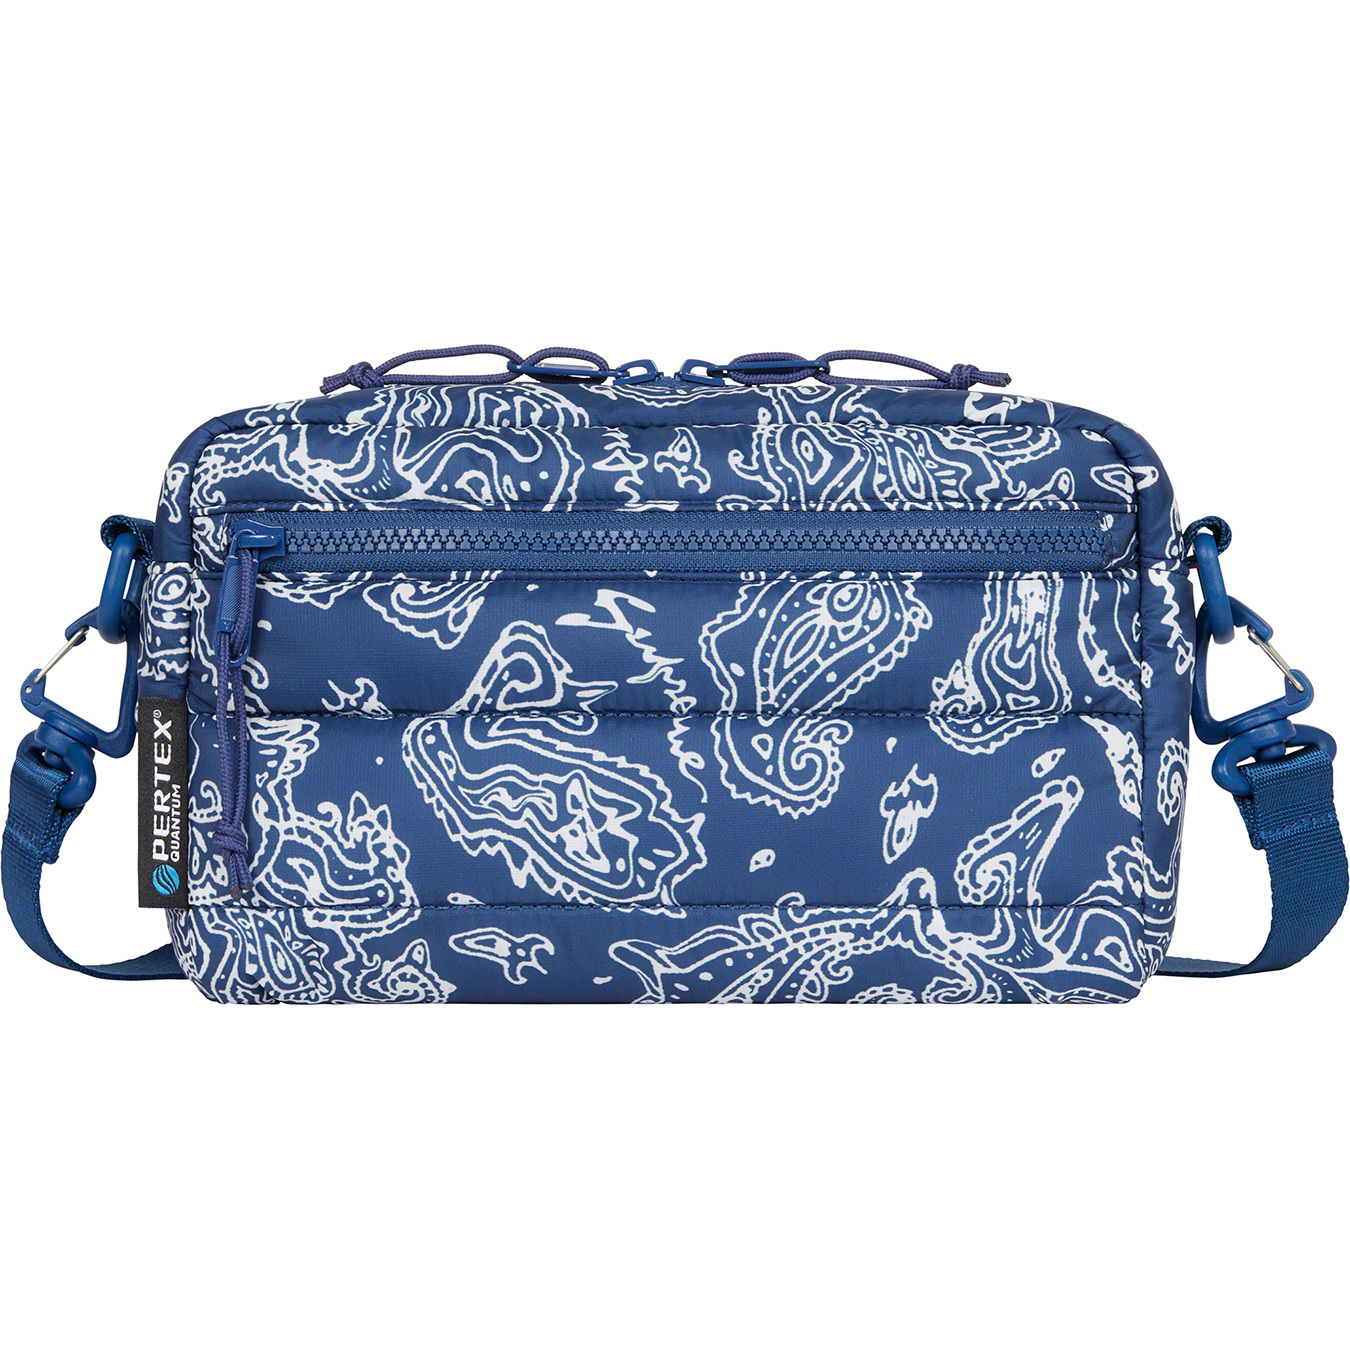 ❌️SOLD OUT❌️ Supreme FW22 Puffer Side Bag (Blue Paisley